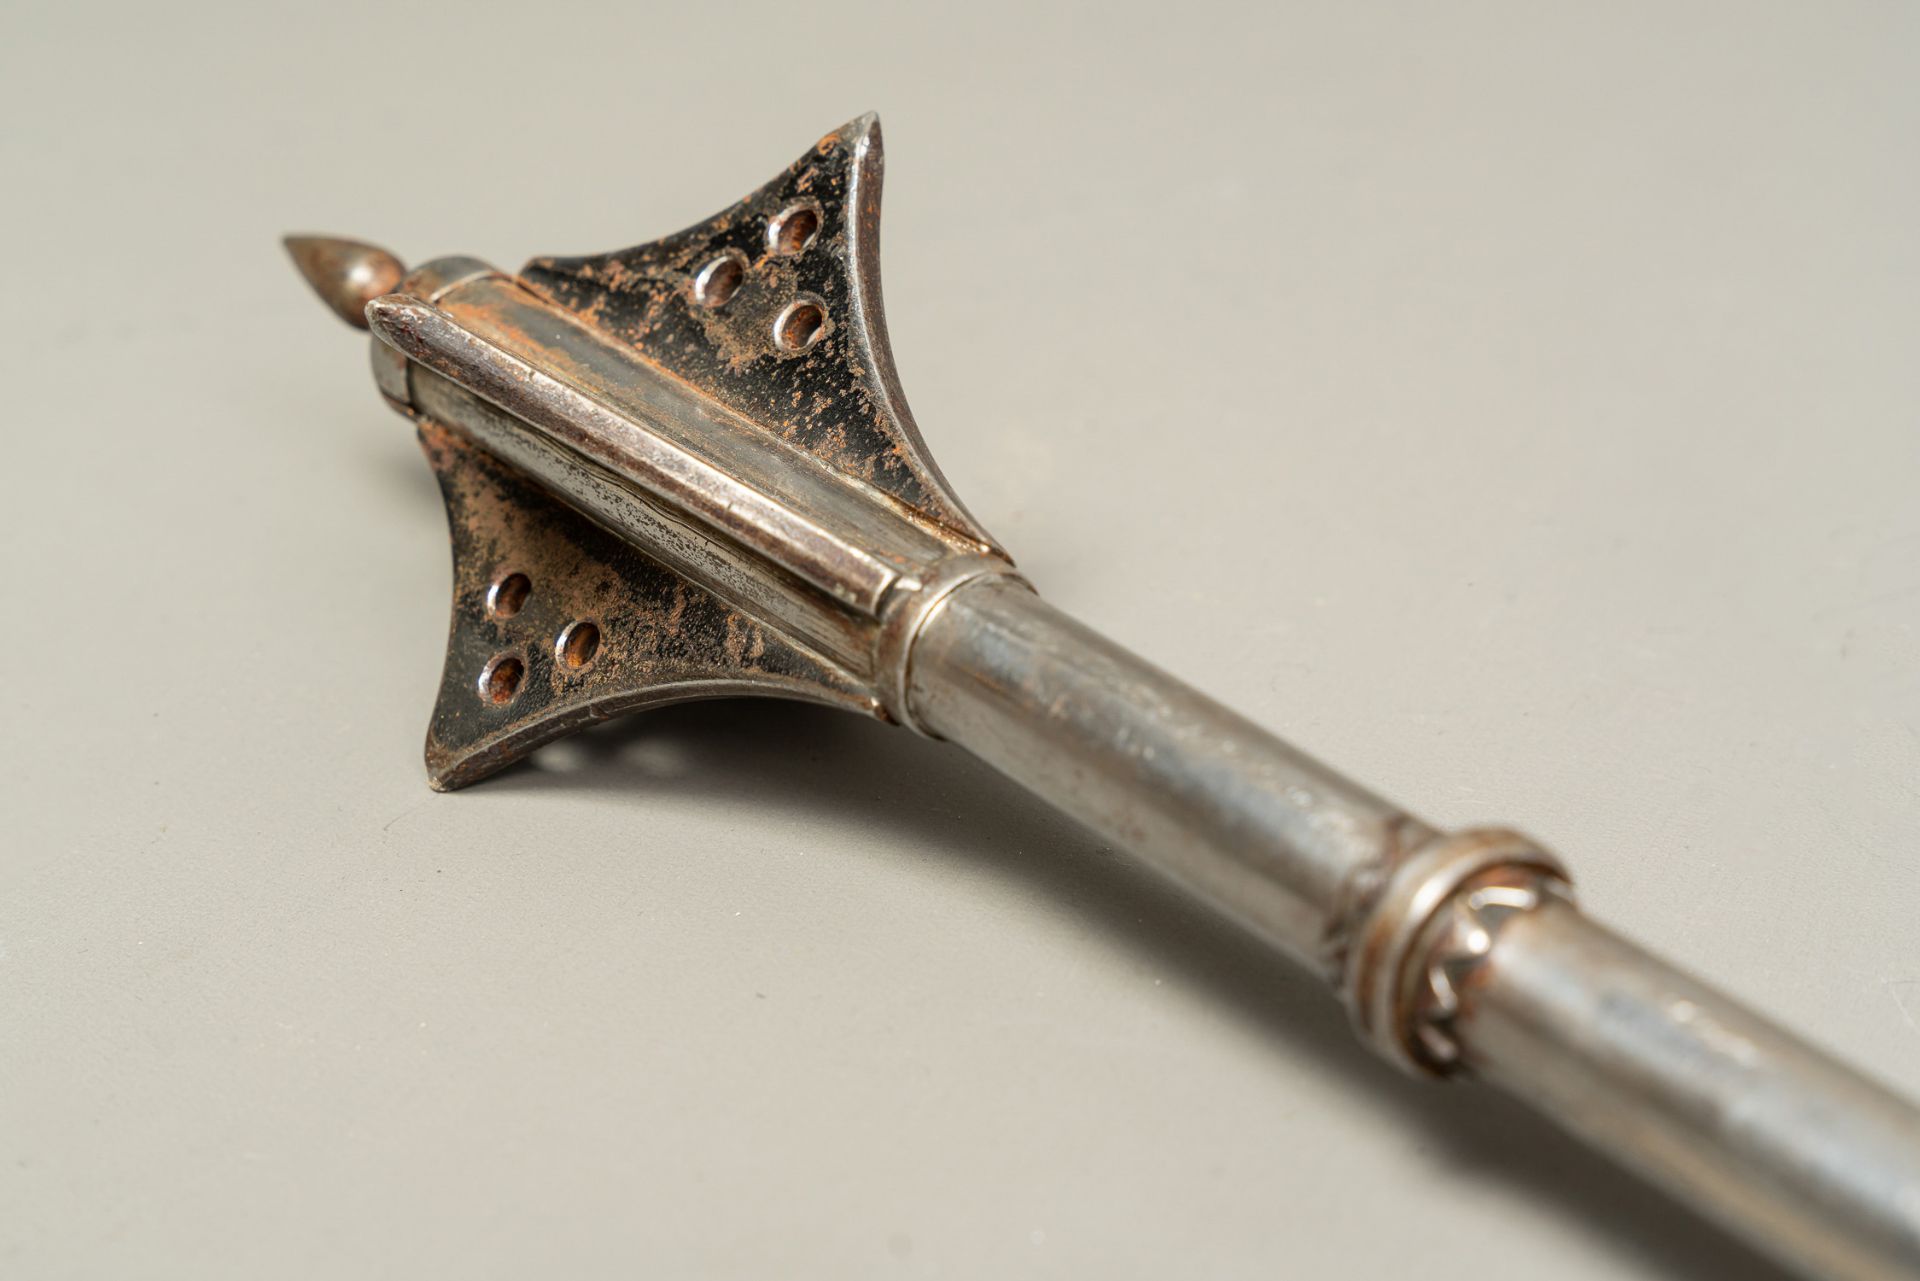 Iron Mace in Medieval Manner - Image 3 of 3